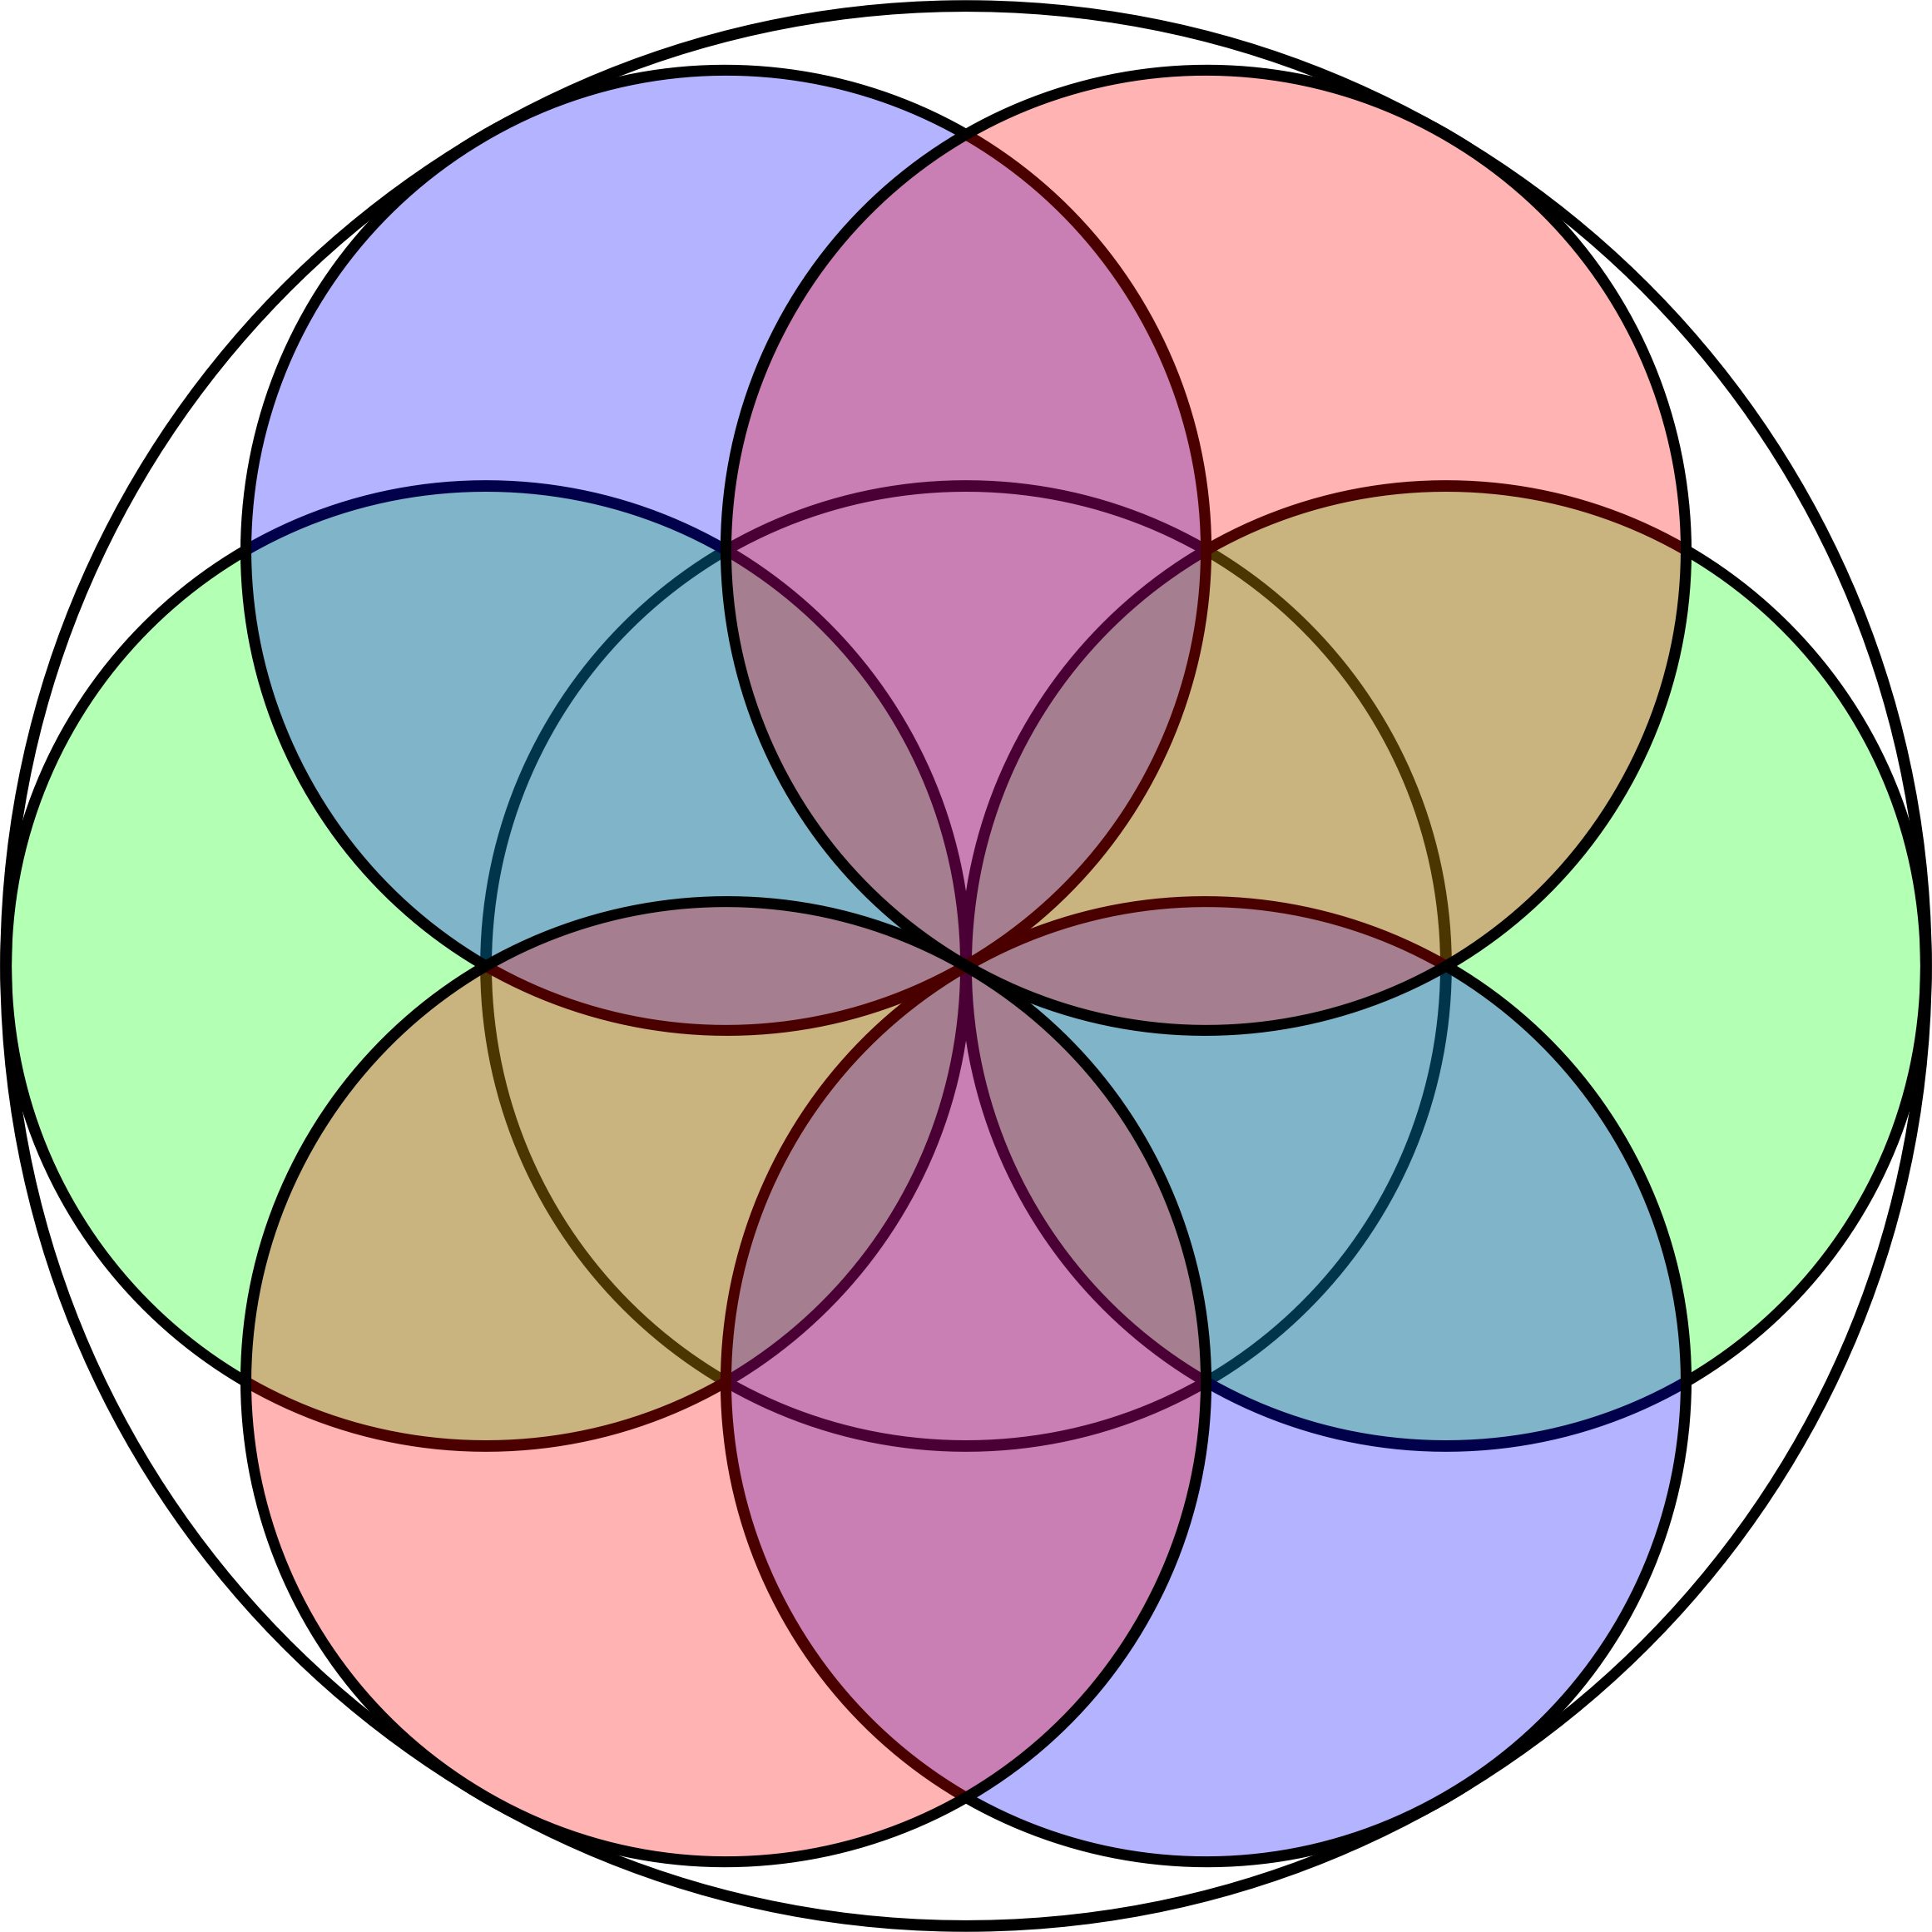 Geometry clipart object. Circle symbol concentric objects